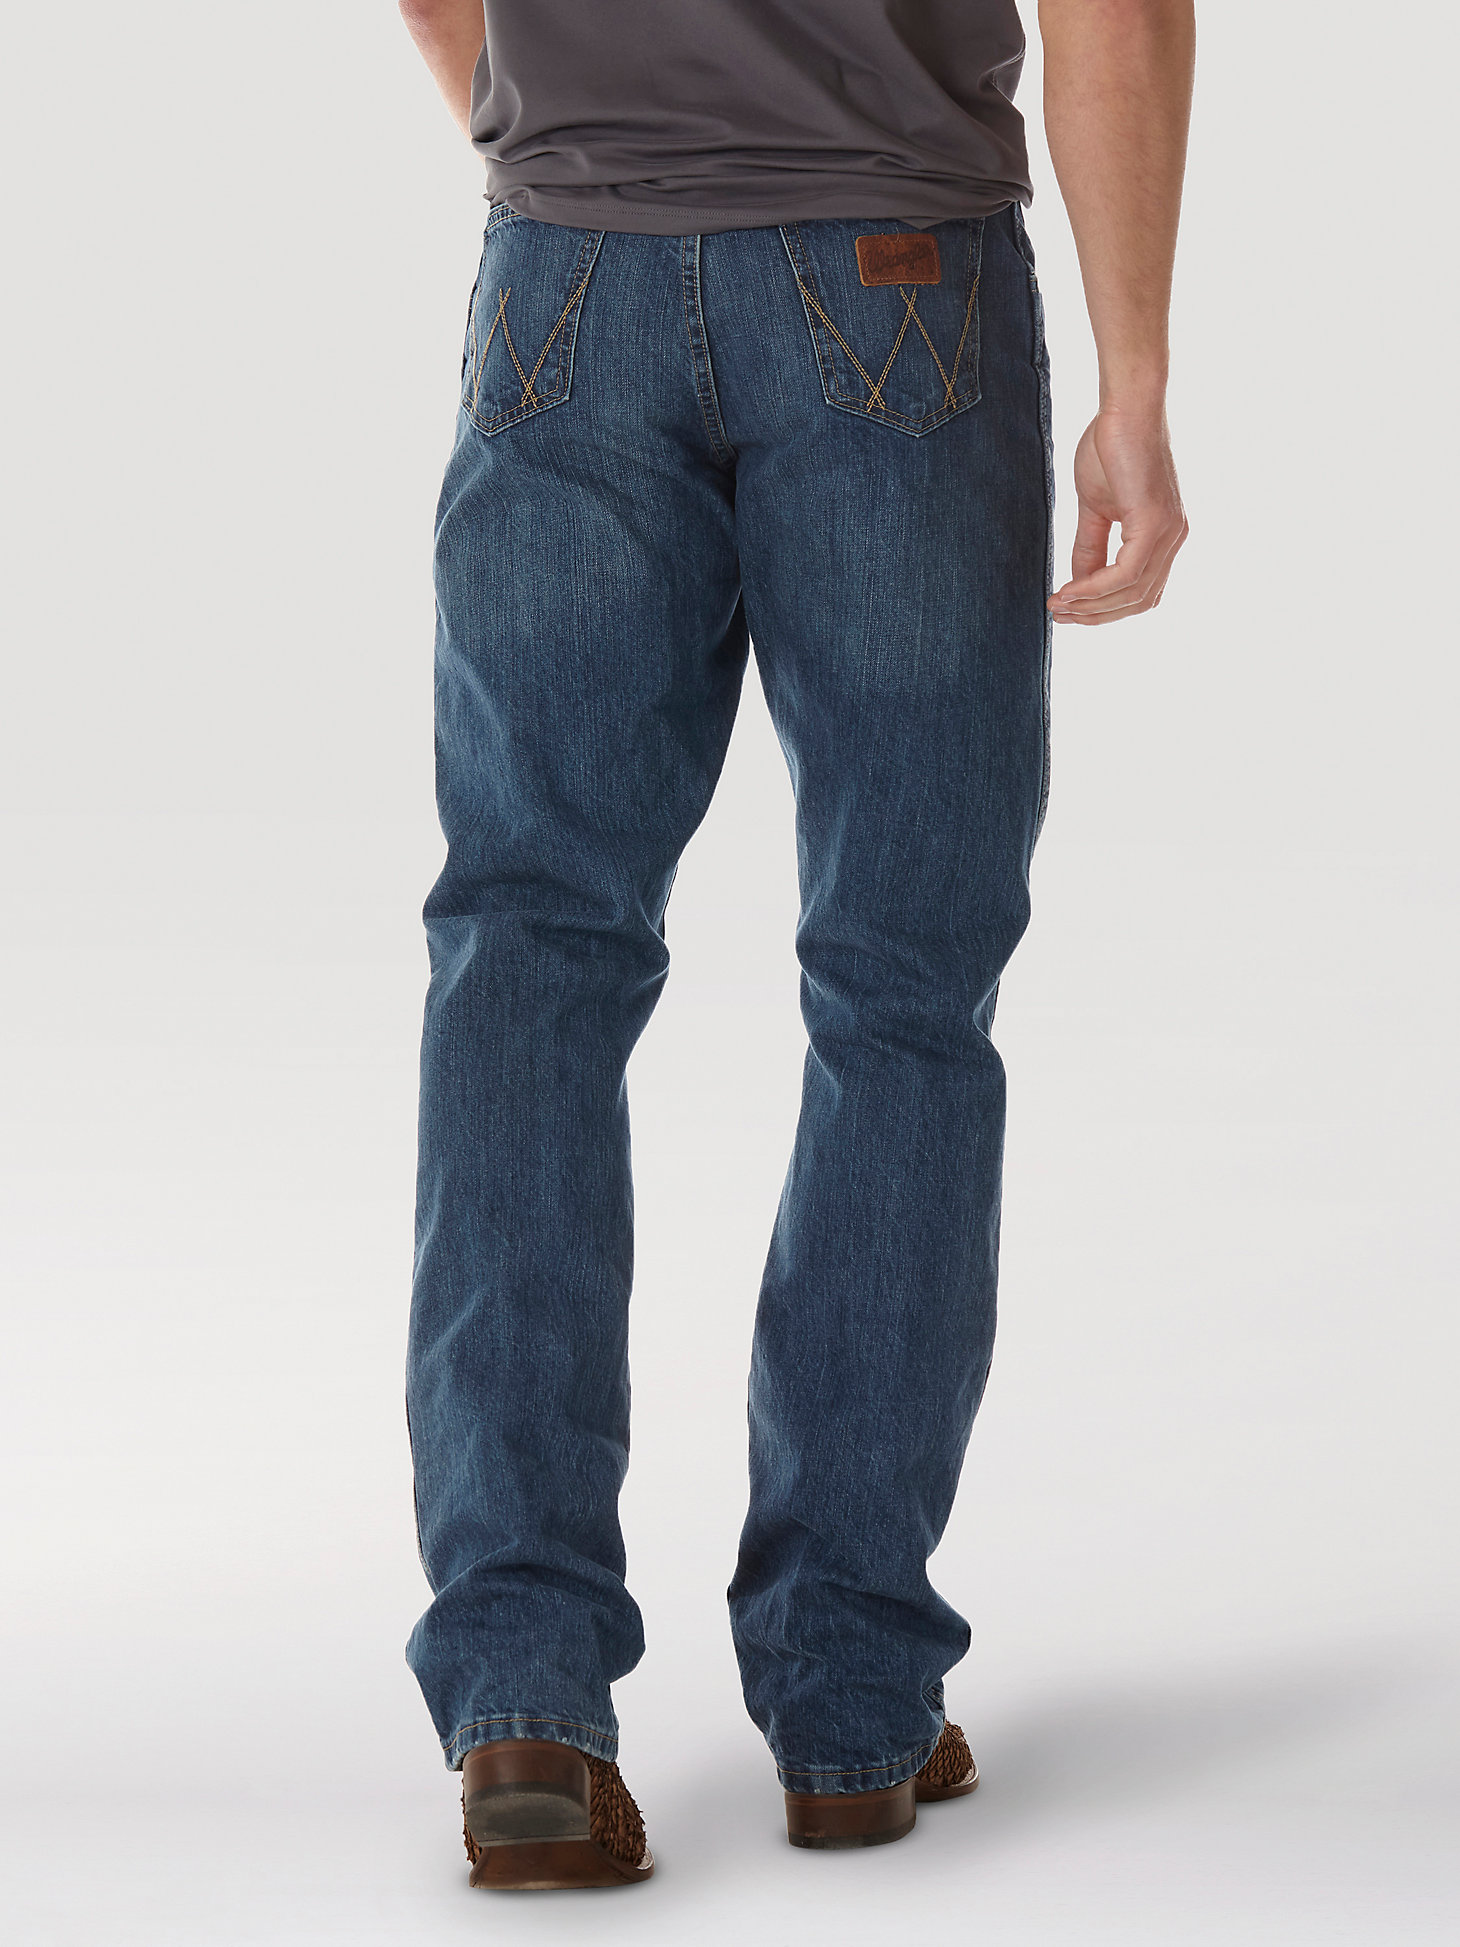 Men's Wrangler Retro® Relaxed Fit Bootcut Jean in TB Wash alternative view 2